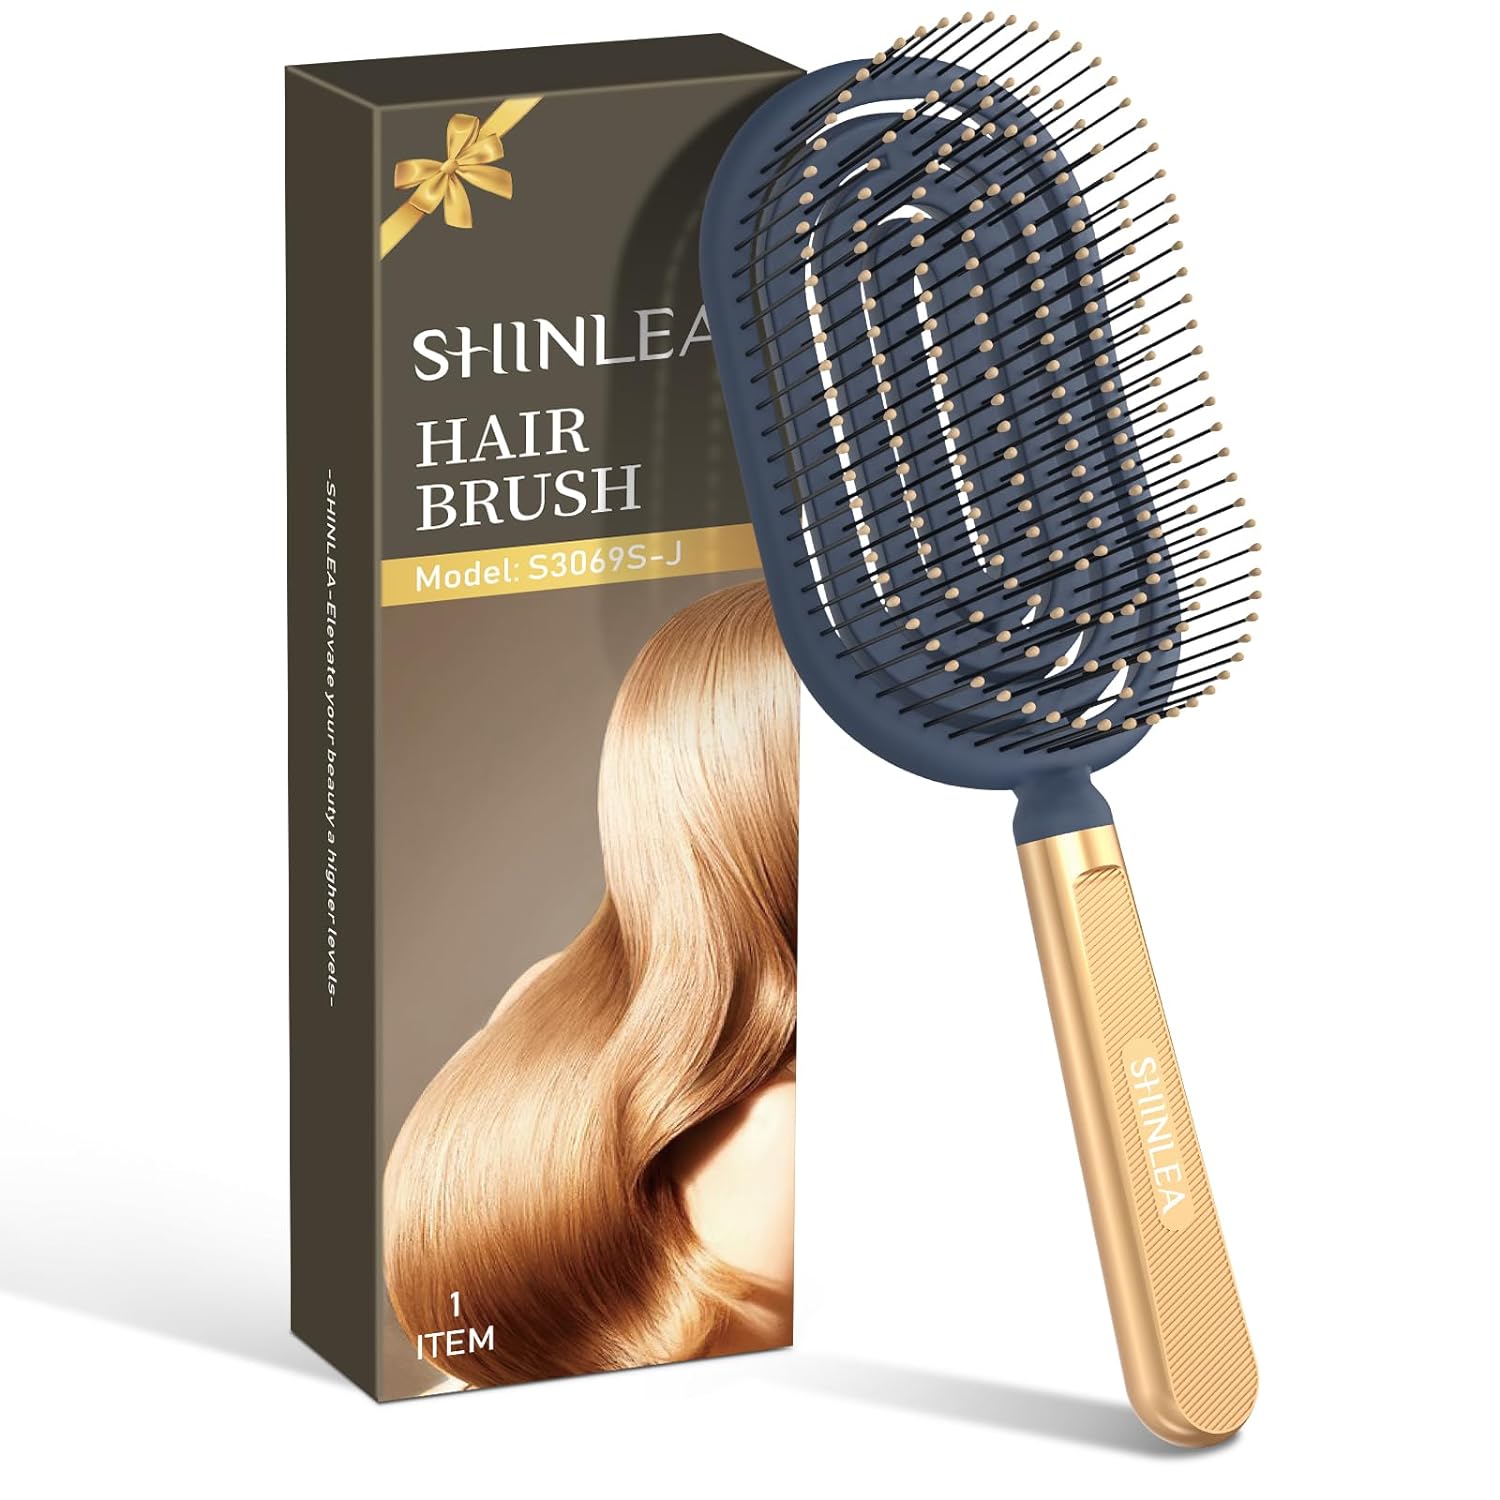 SHINLEA Spiral Hair Brush, Quick Drying Hair Brush without Pulling with Ventilation Opening for Wet and Dry Hair, Massage Hair Brush with Flexible, Soft Bristles for Women, Men, Children